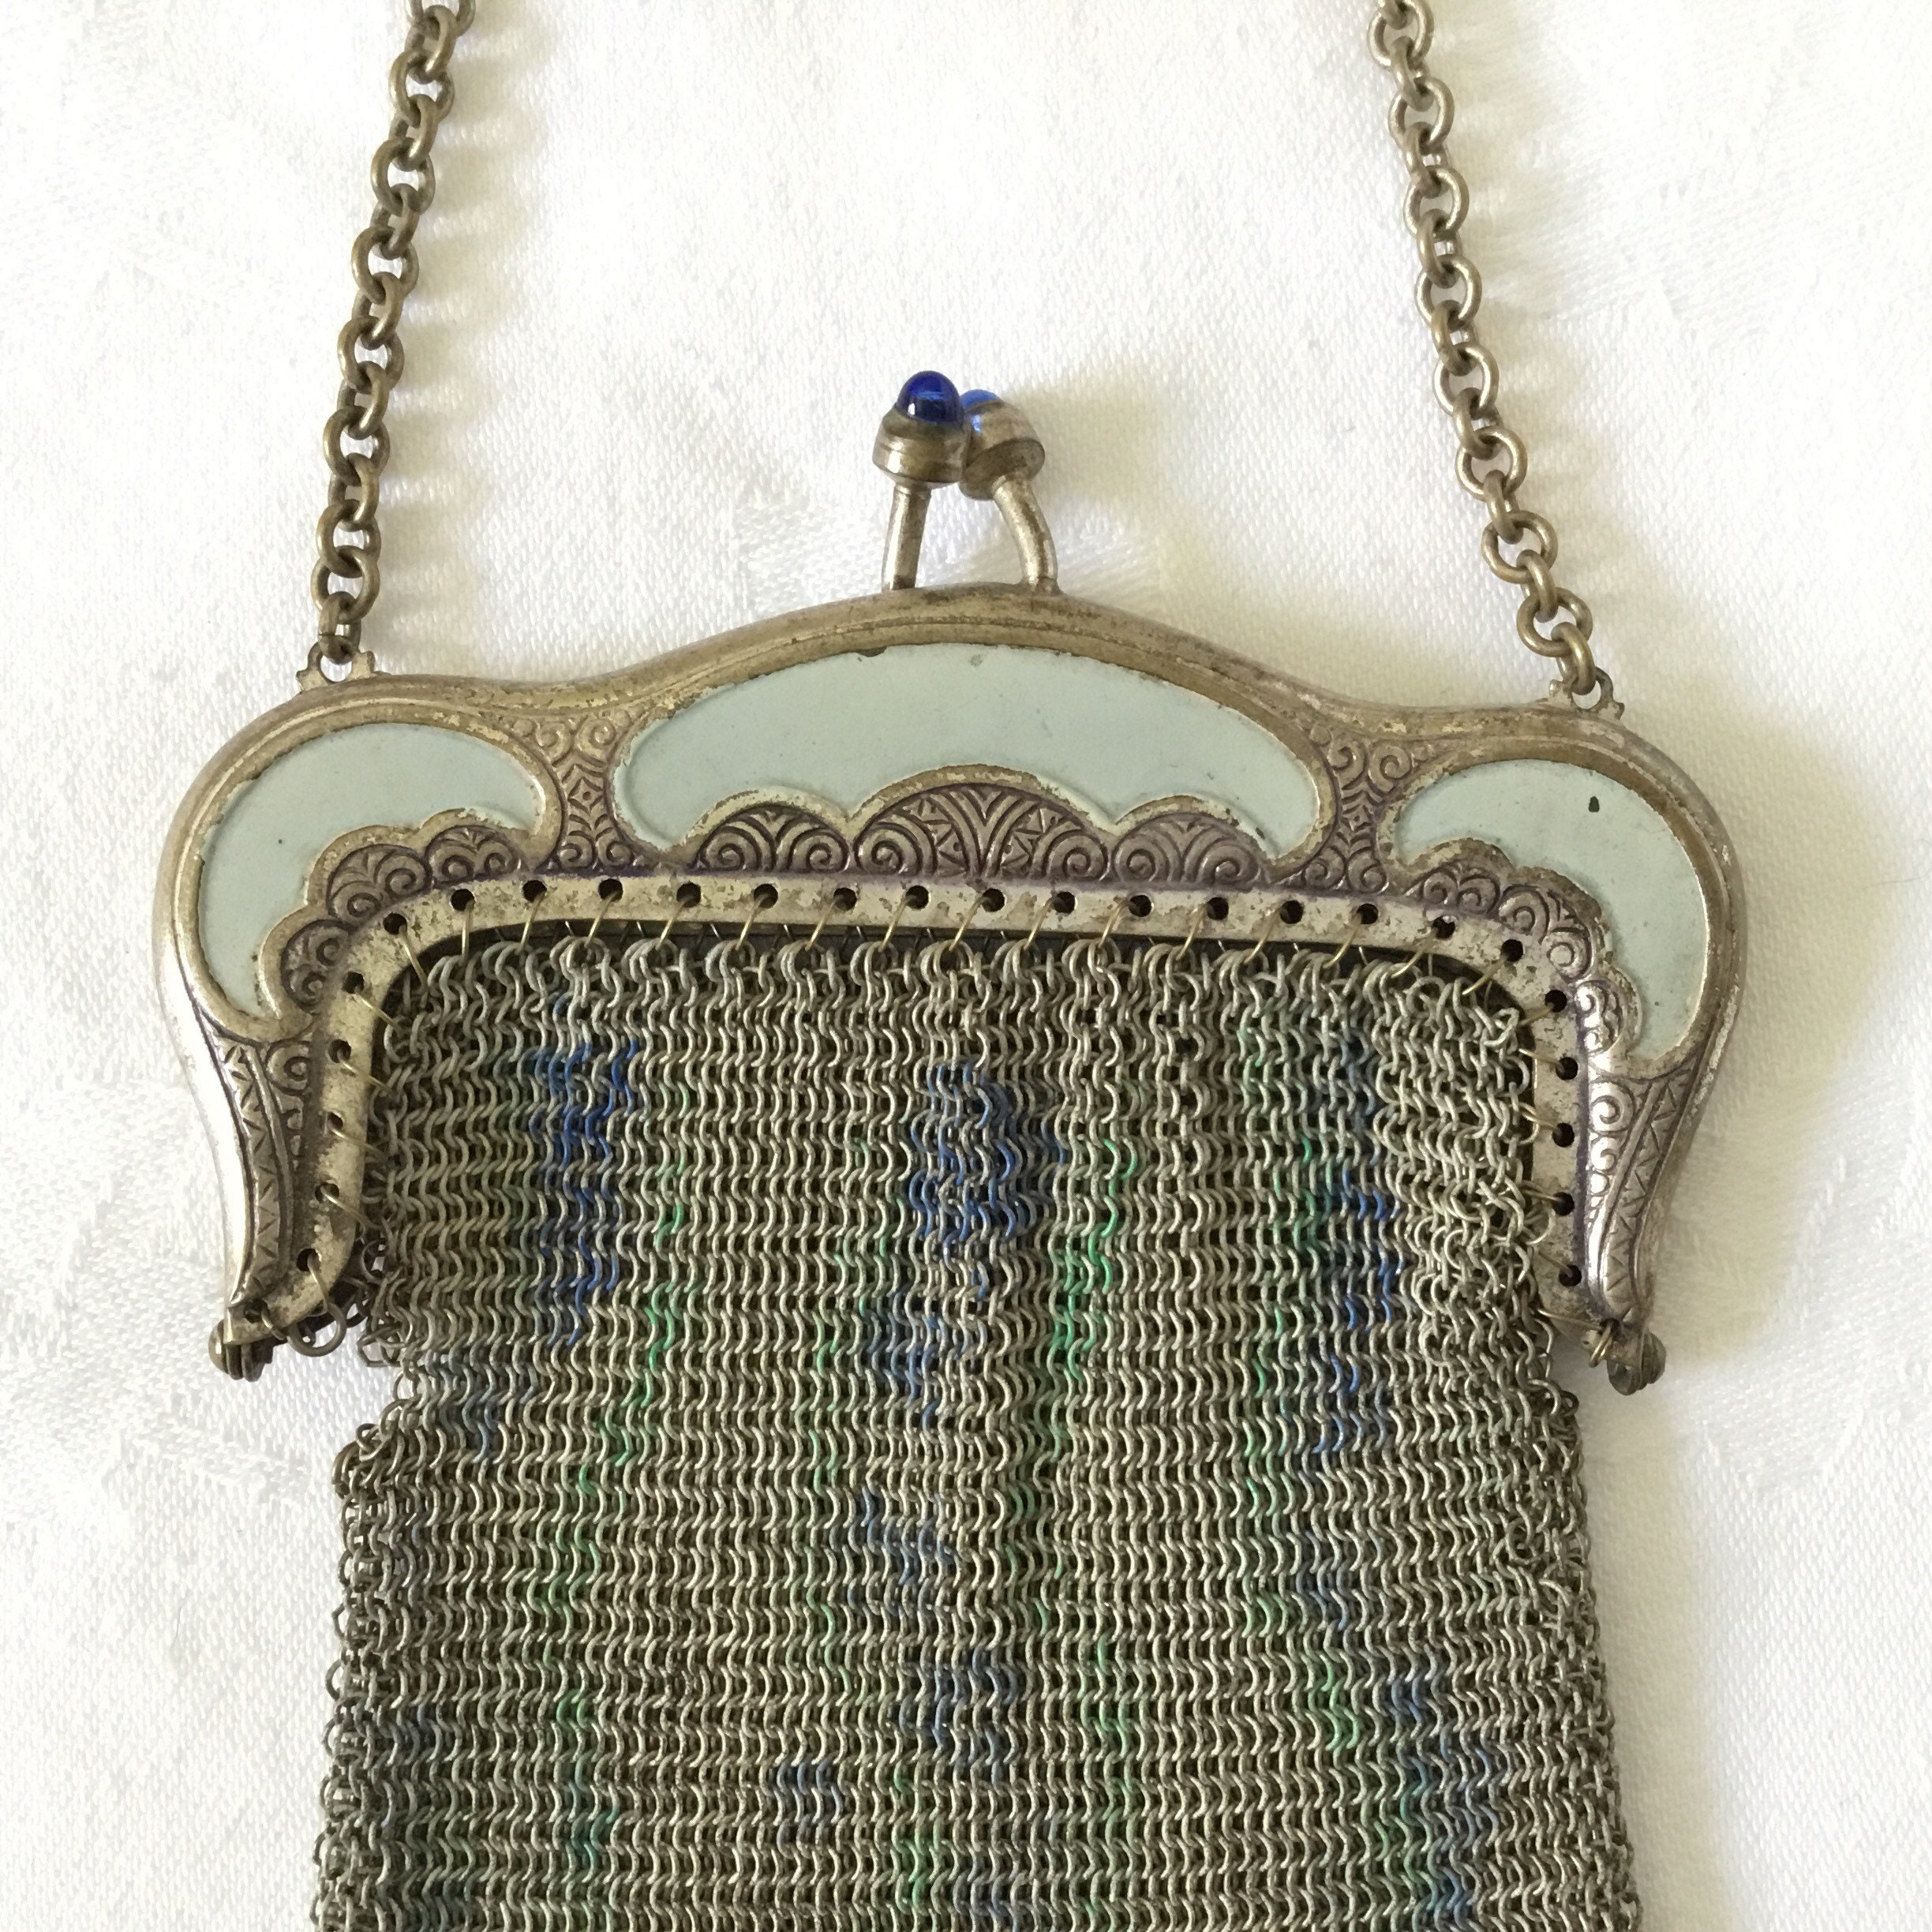 Vintage bag flapper mesh purse with painted chain mail c1920s.